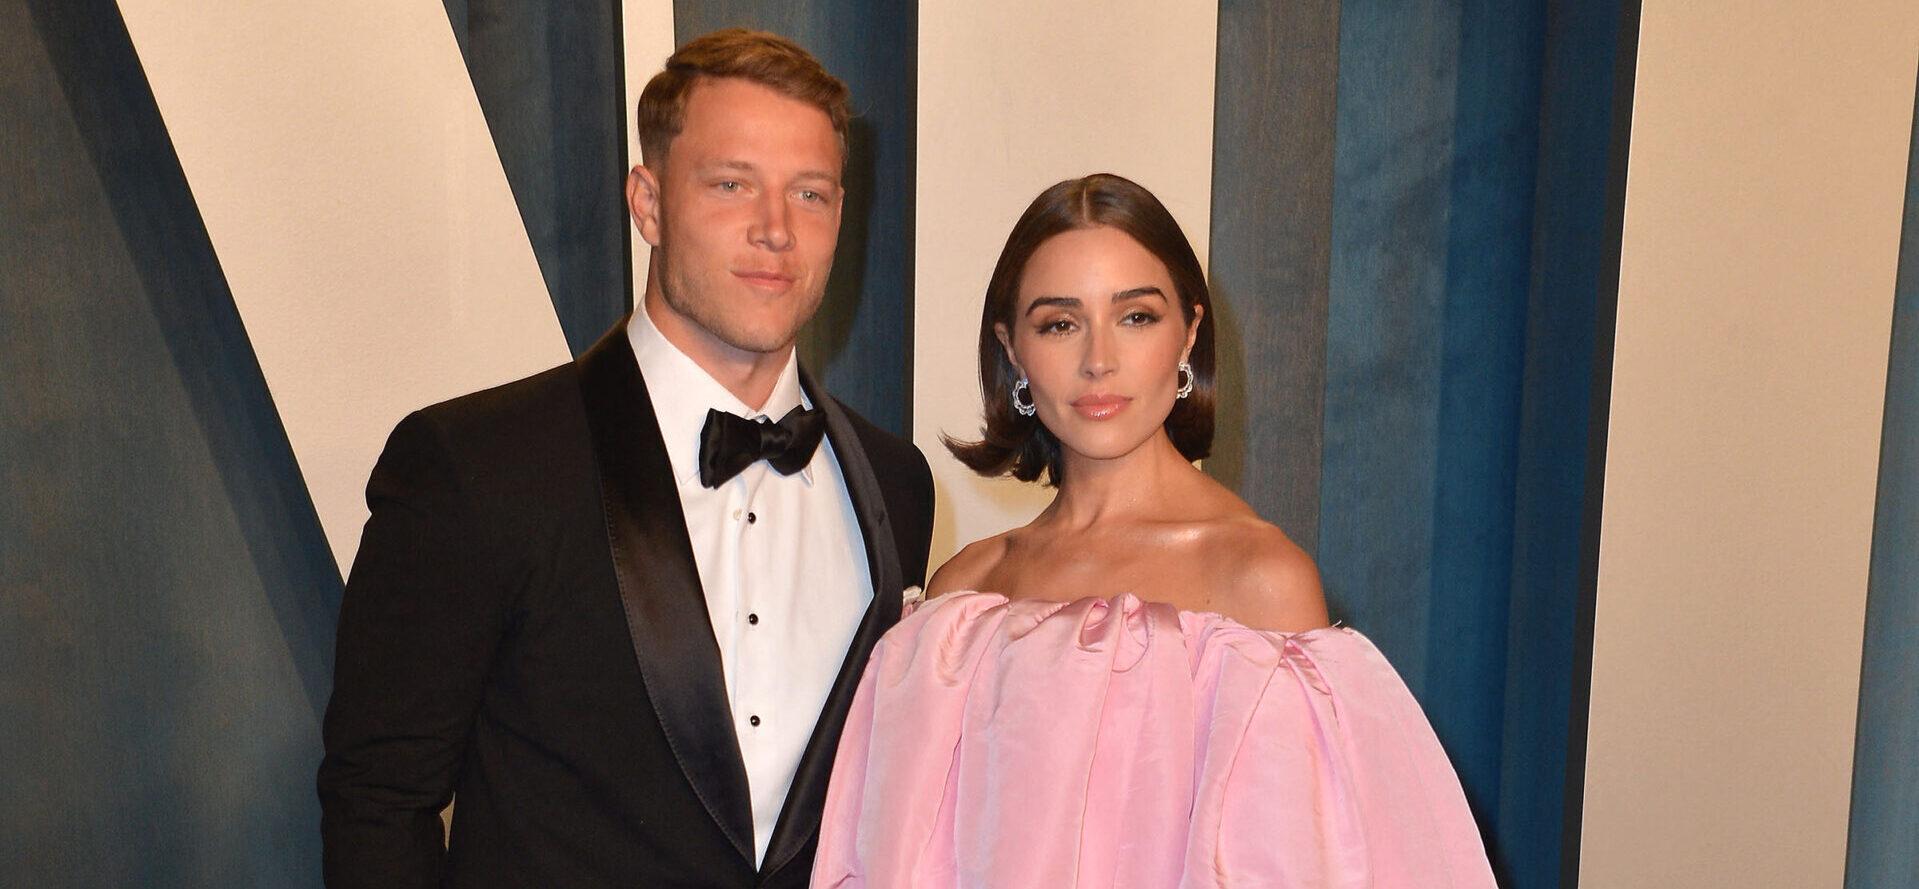 Olivia Culpo Blasts ‘Fake News’ Over Not Being Able To Afford Super Bowl Suite